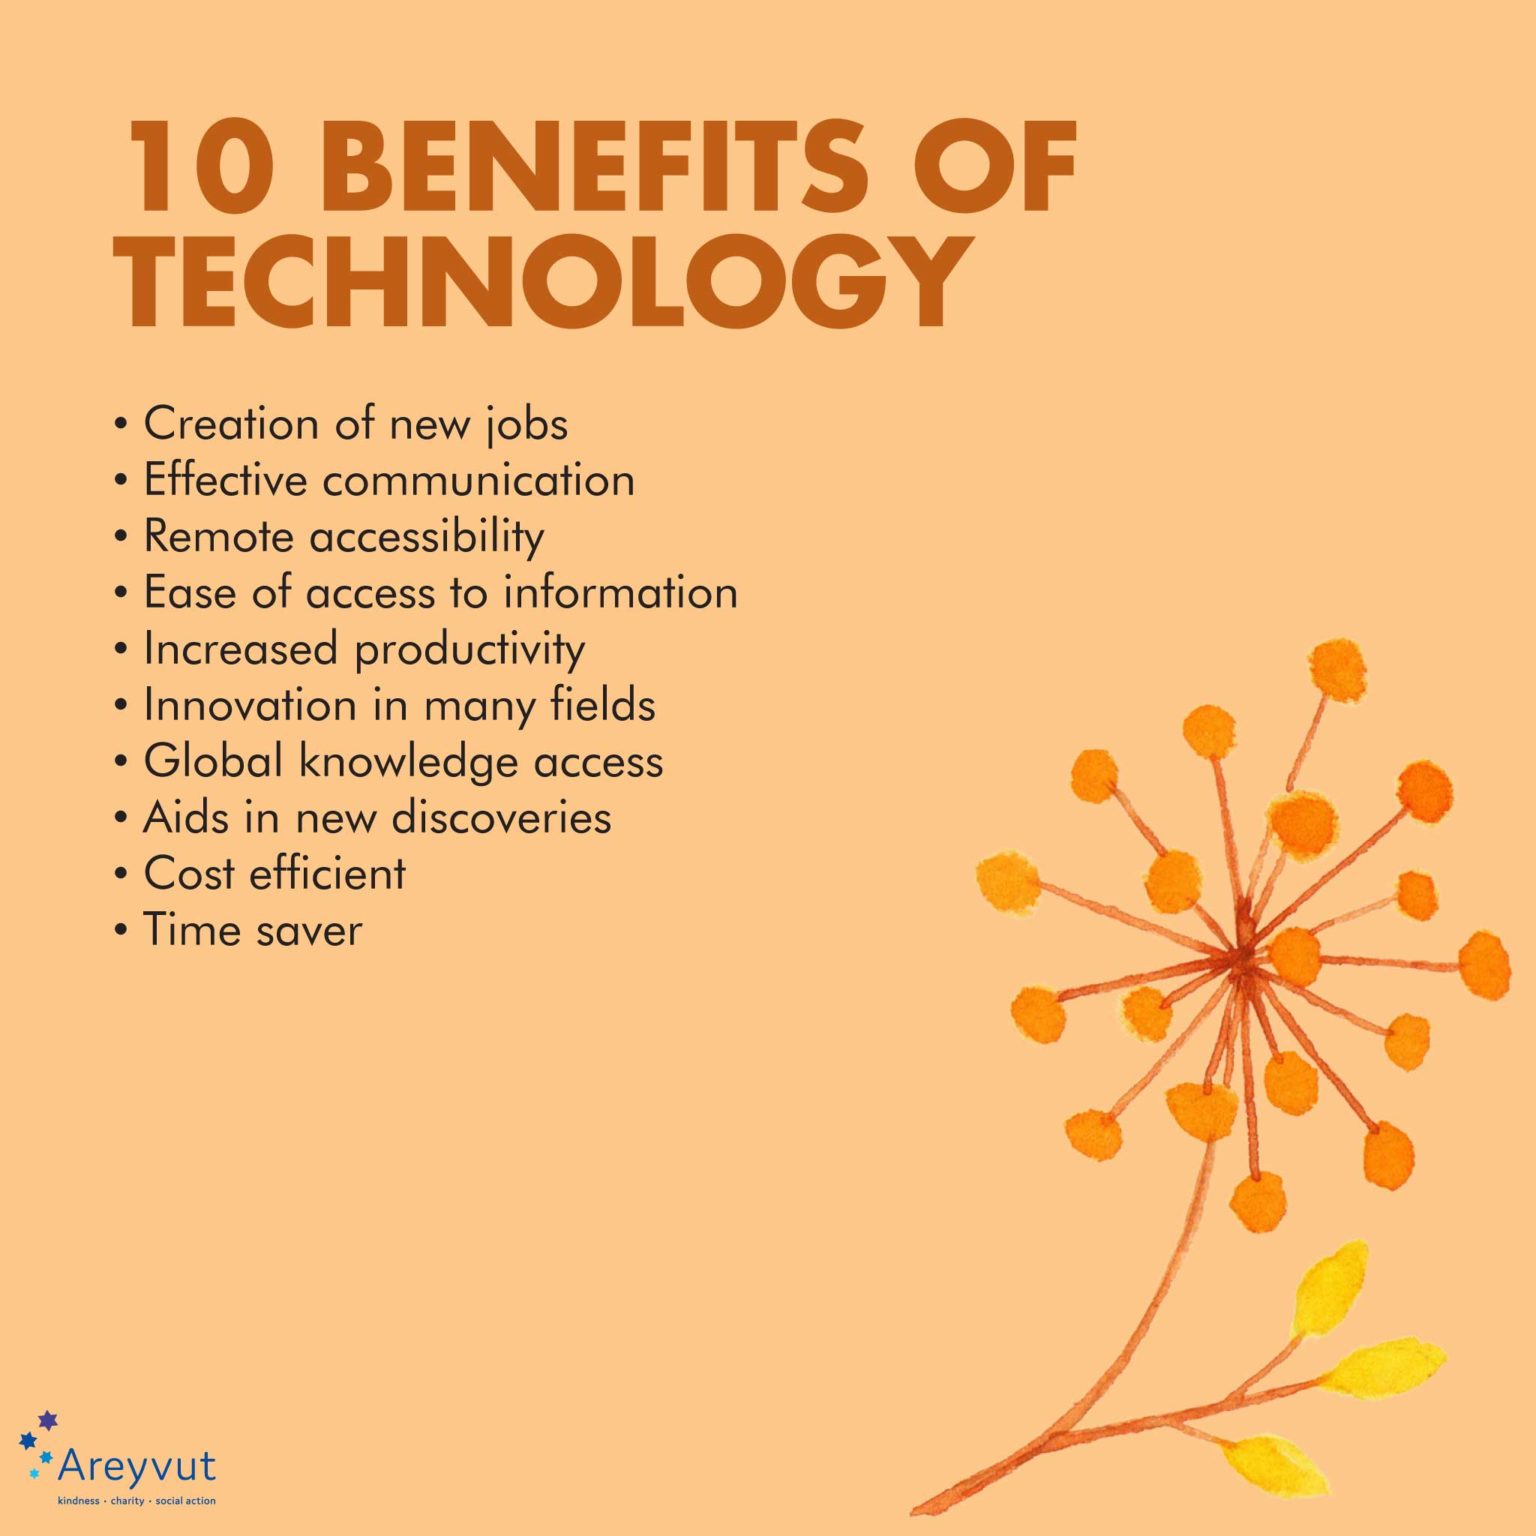 benefits of technology in society essay